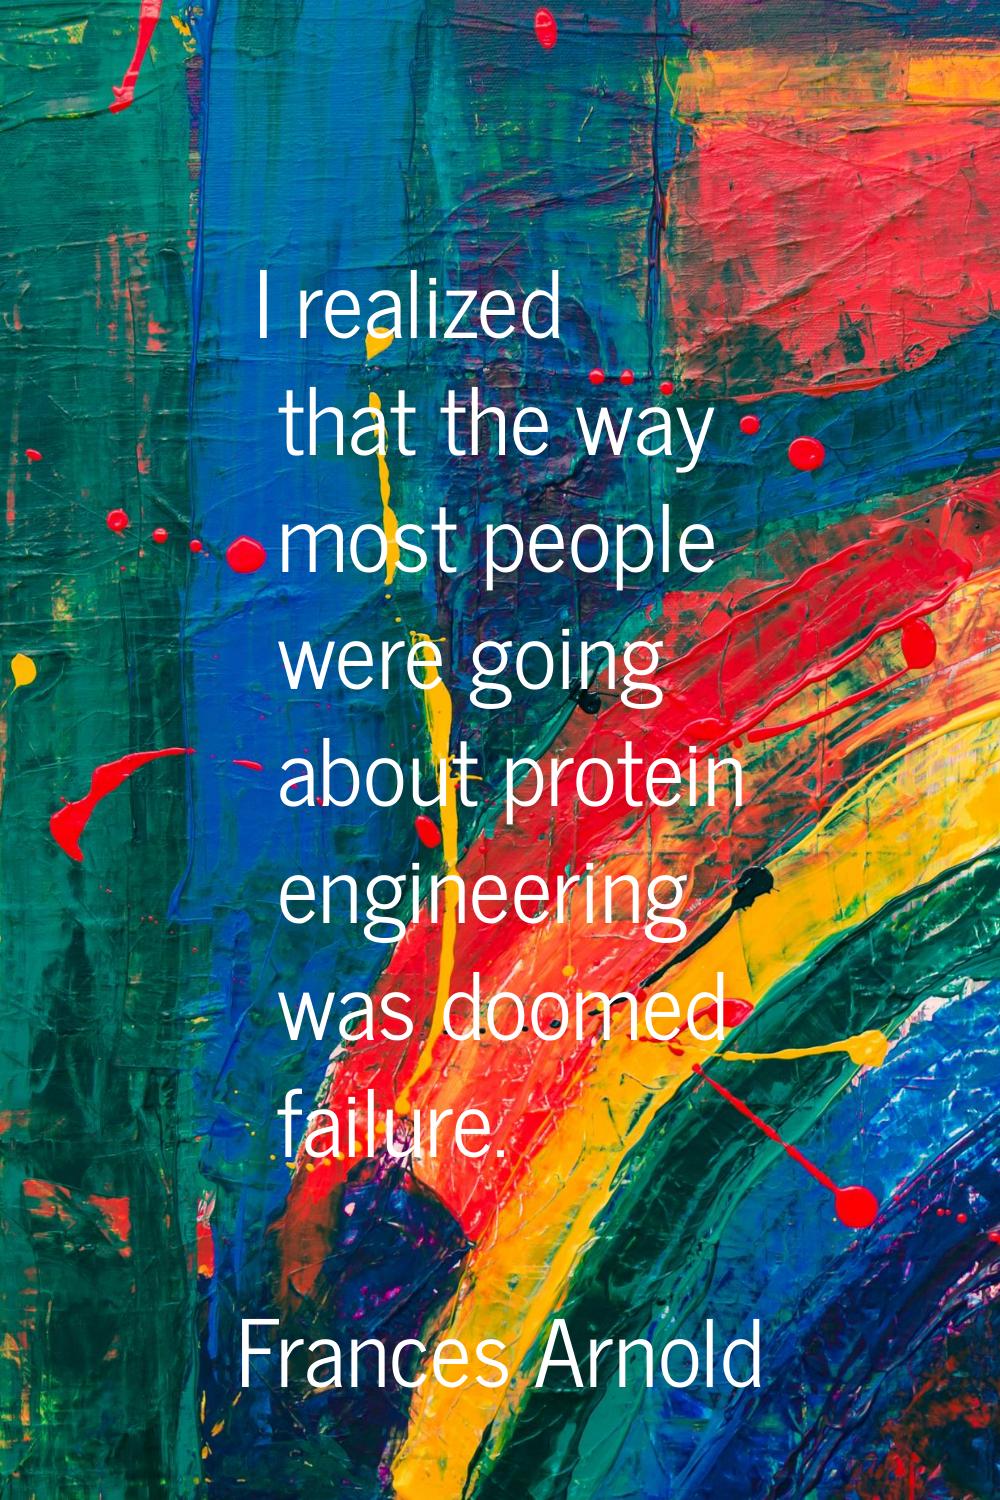 I realized that the way most people were going about protein engineering was doomed failure.